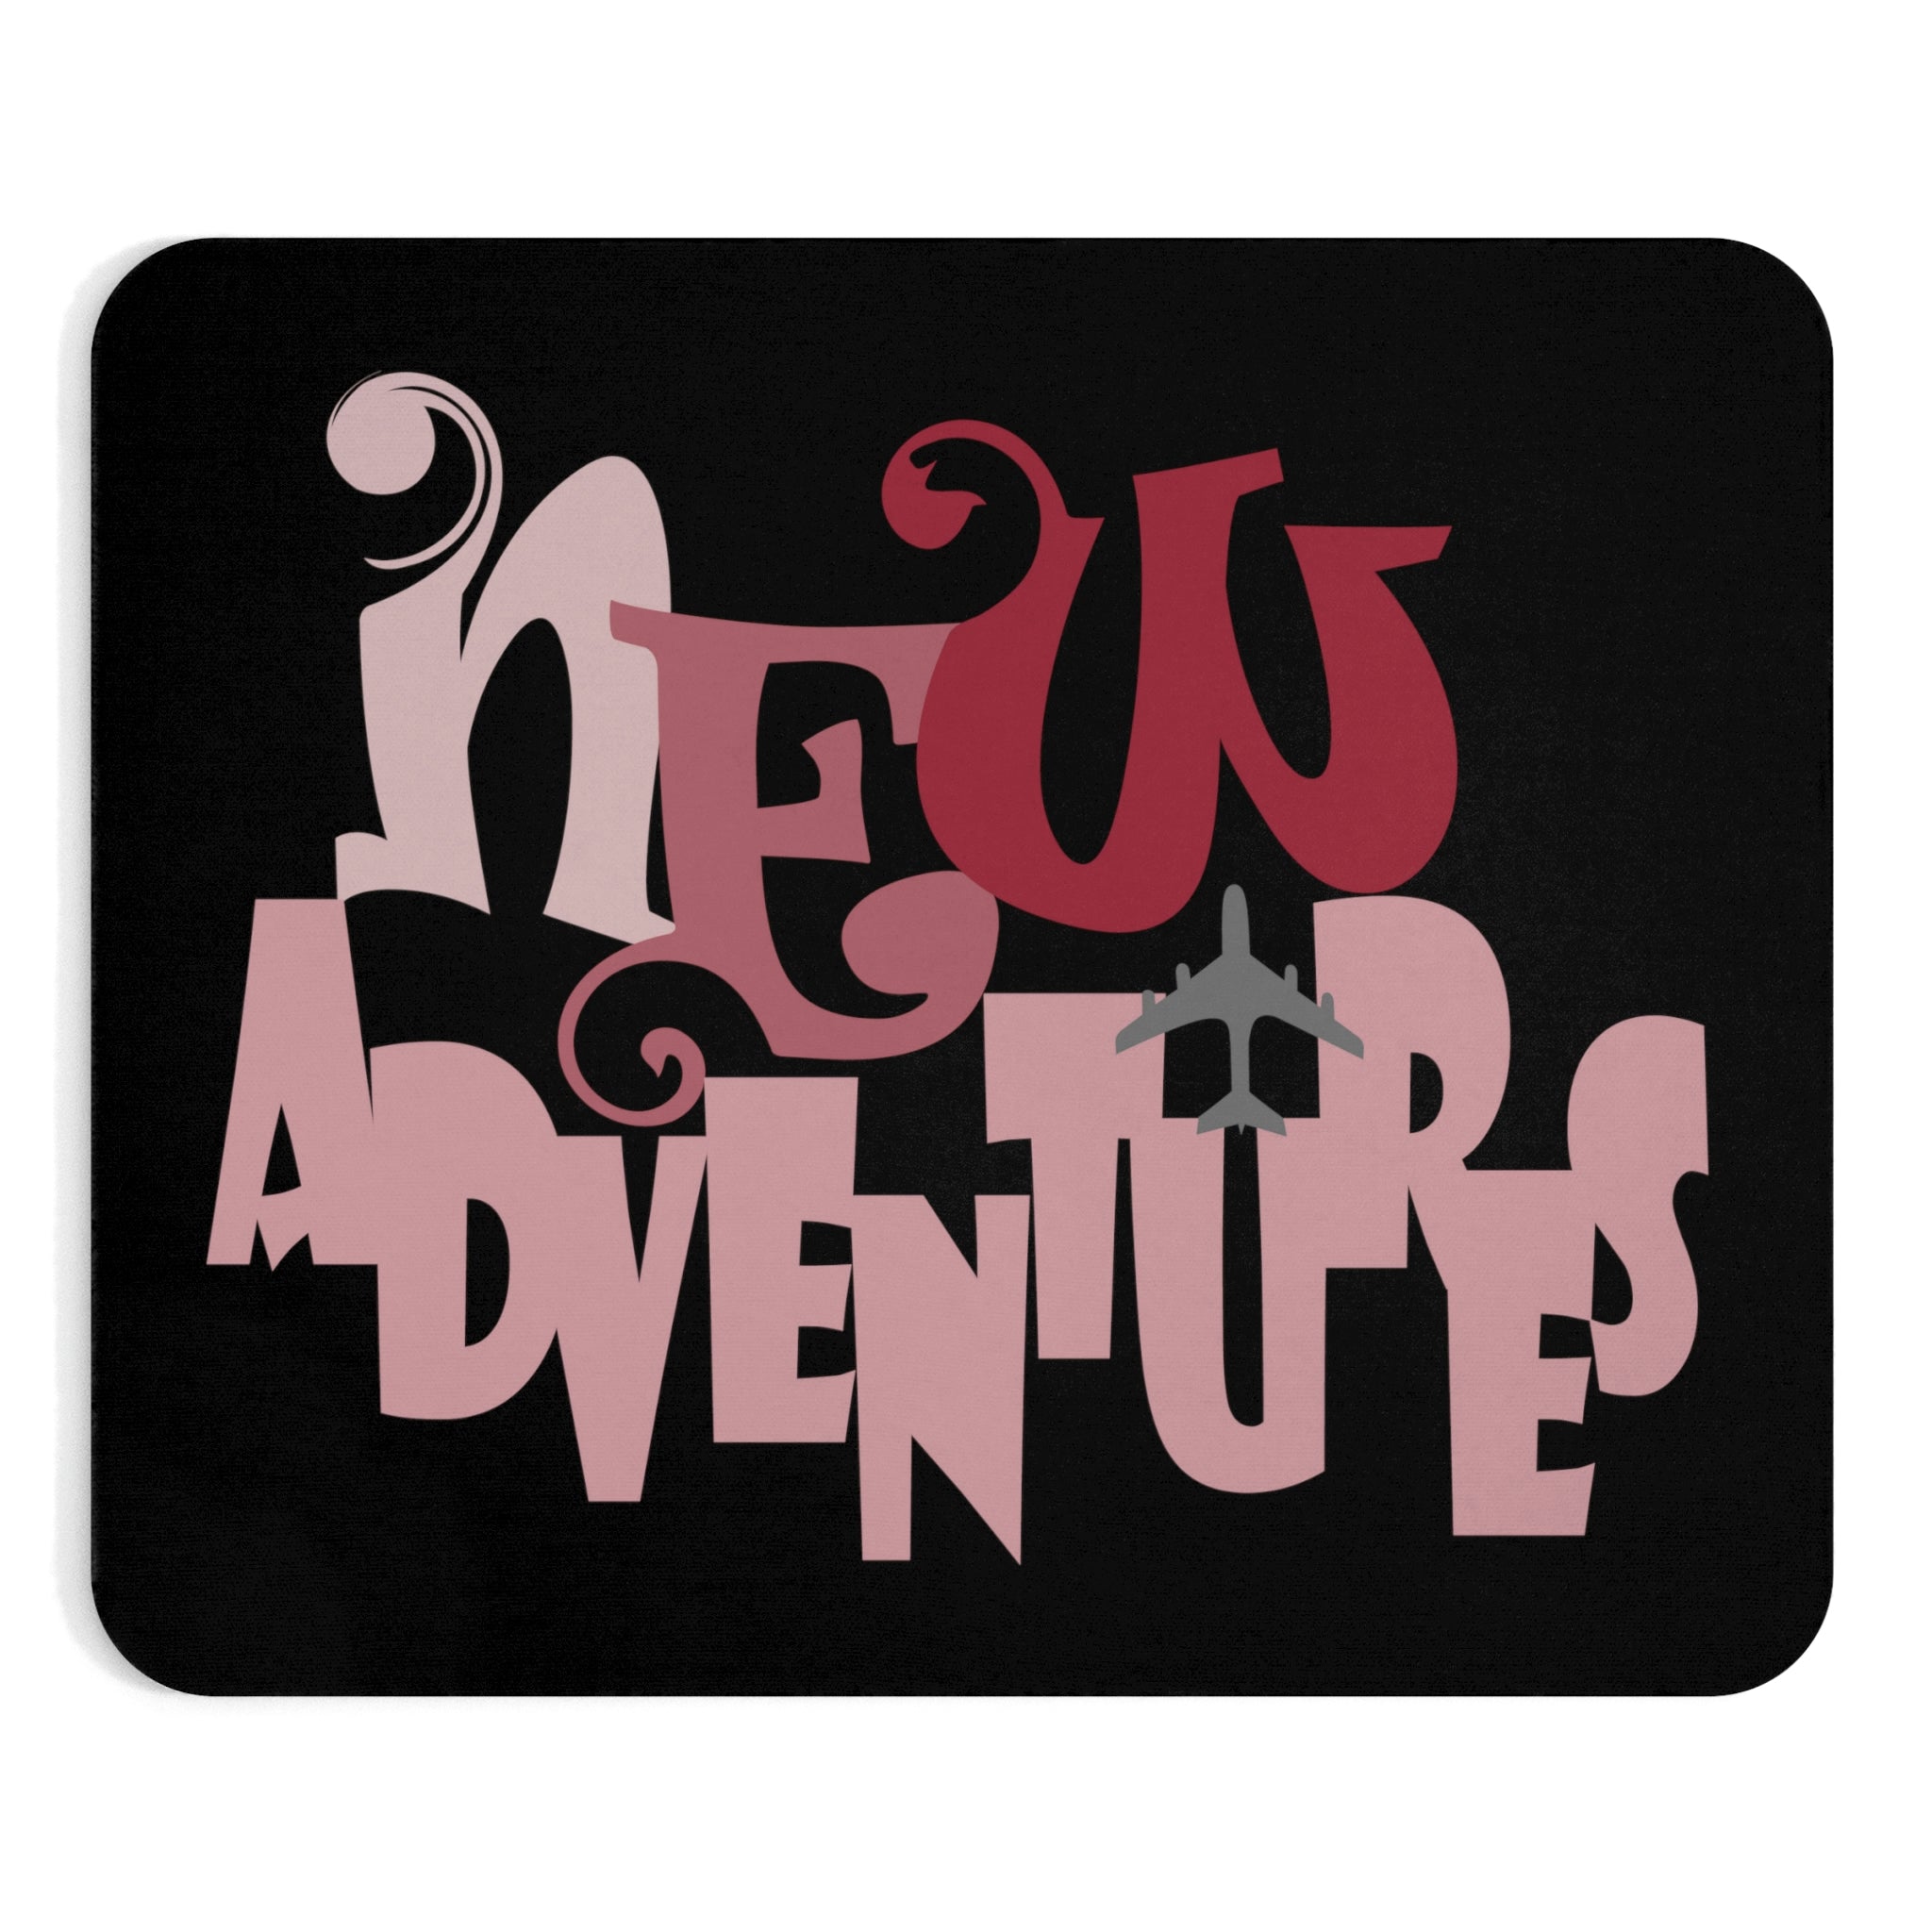 New Adventures Mouse Pad - Black